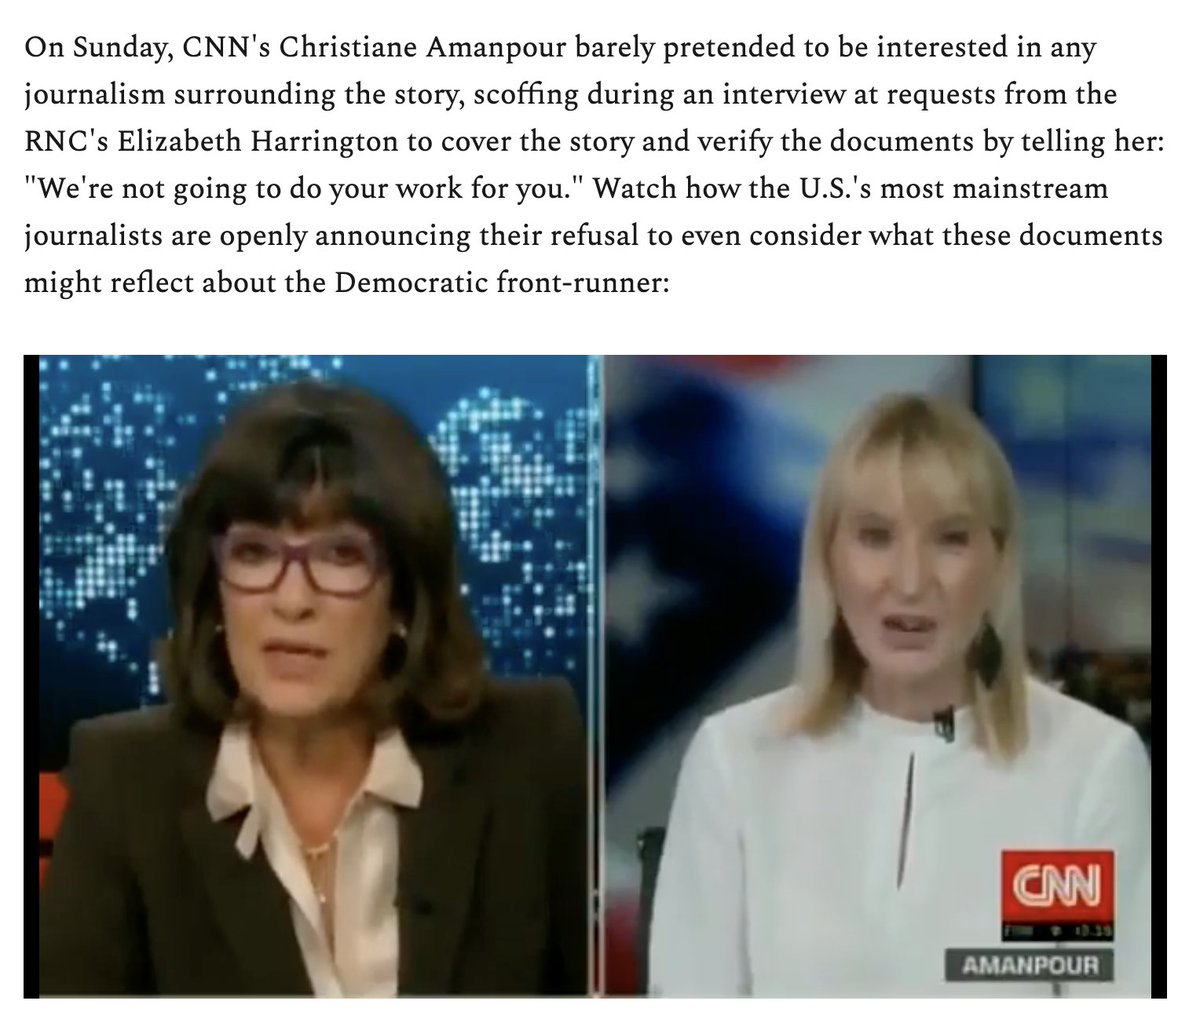 Glenn misstates what goes on in this interview. Amanpour corrects that RNC hack's misrepresentation of what the FBI said (which Glenn did, above) and says there's no evidence of corruption. Amanpour makes it clear she HAS done journalism. Glenn just doesn't like what it says.